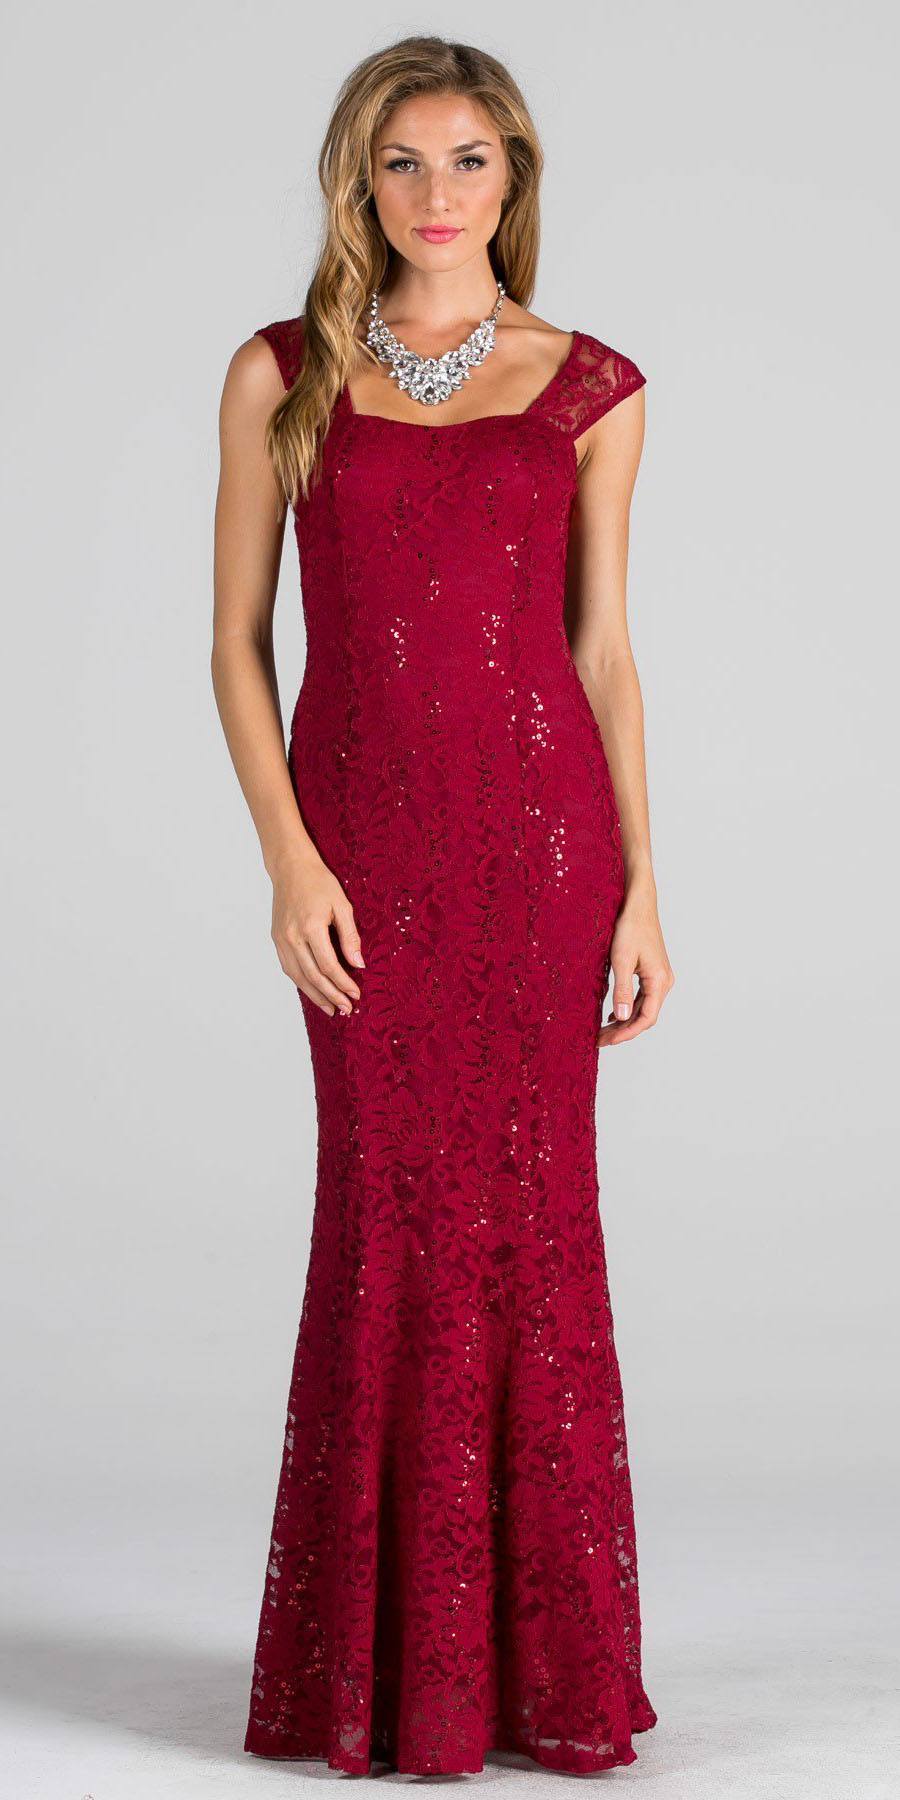 Online readymade red dress with lace back online where